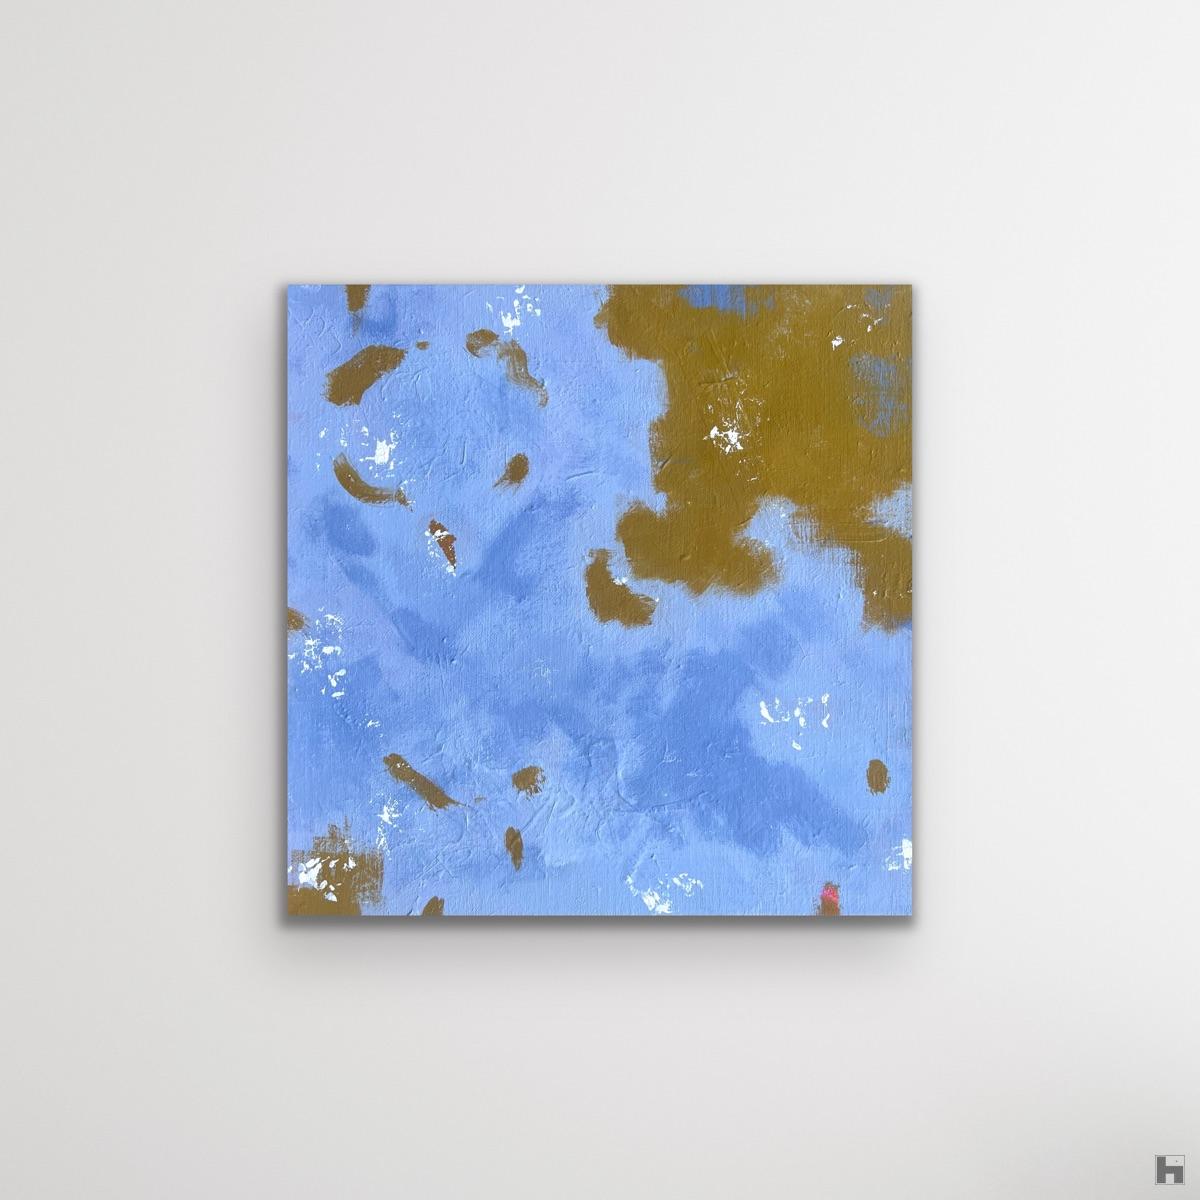 A photo of a square painting in pale blue hung on a white background